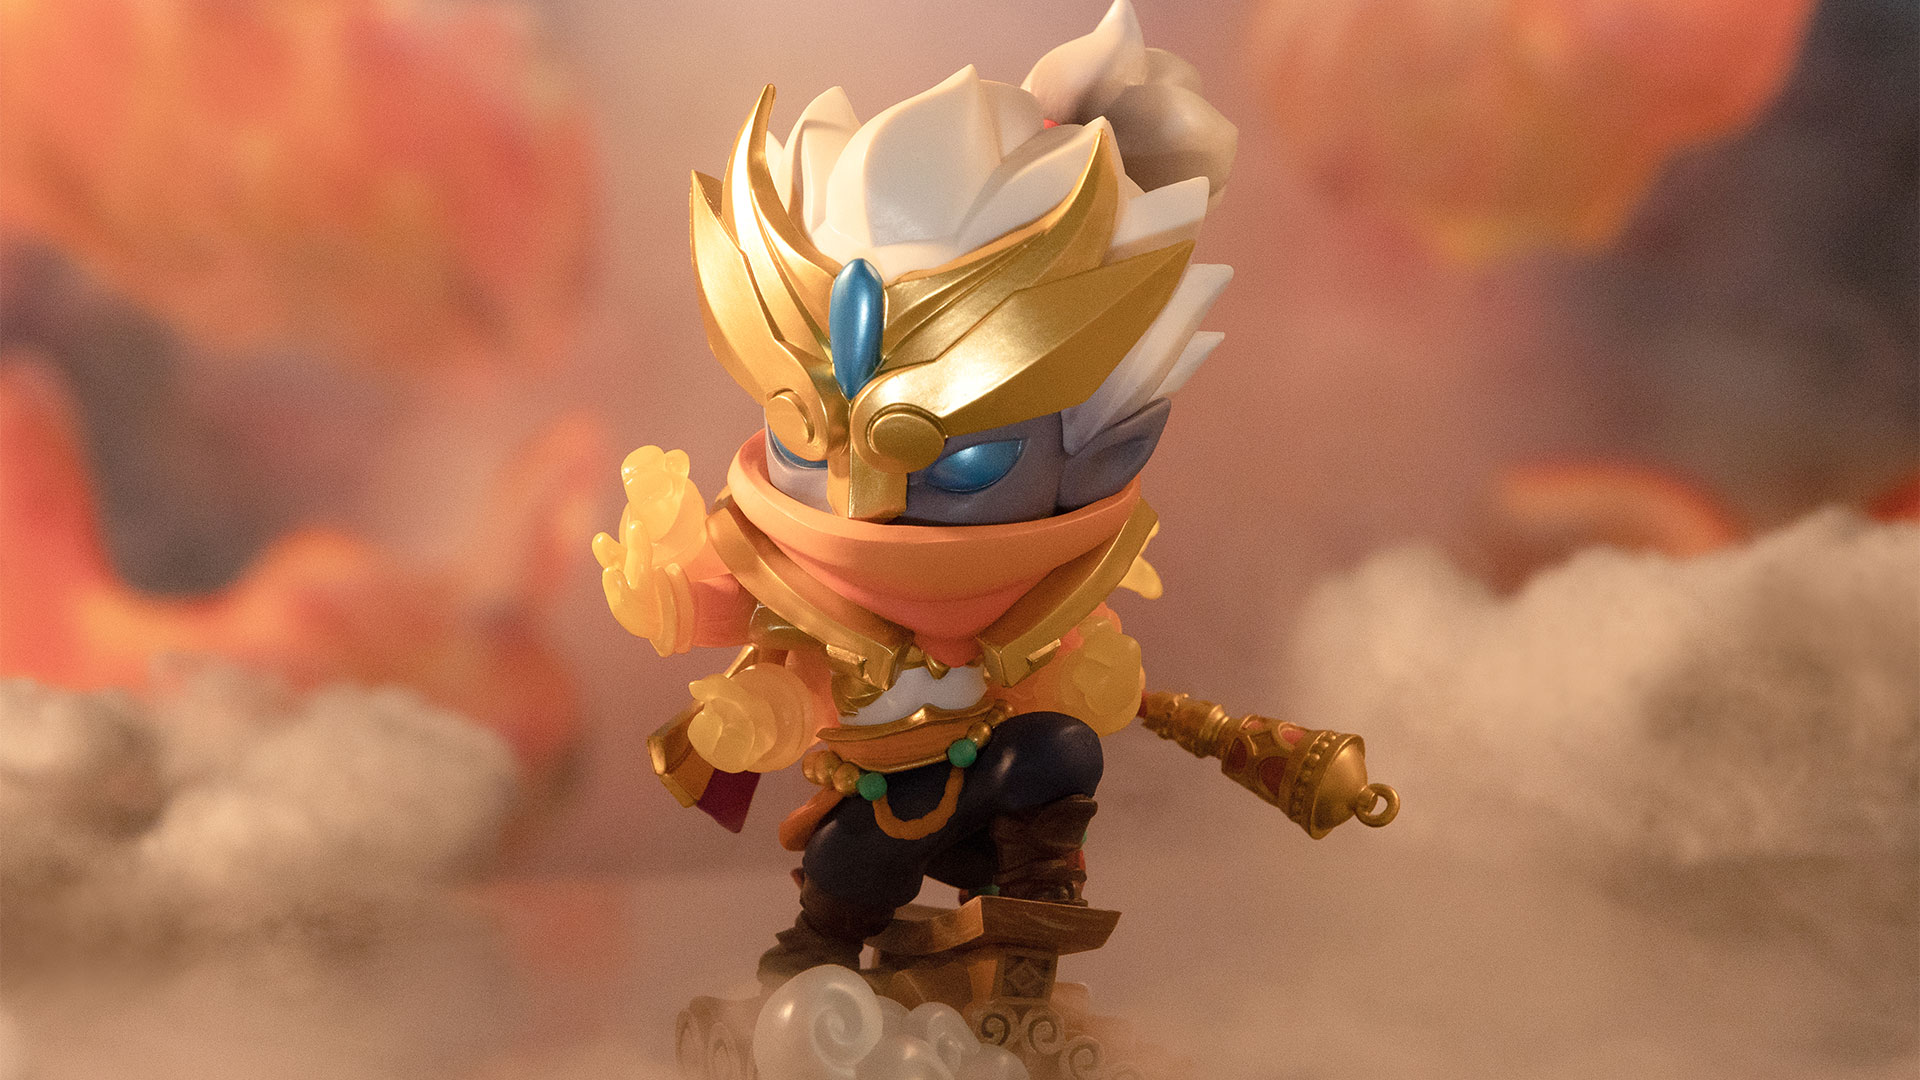 Jax Grandmaster at Arms Plush from League of Legends 